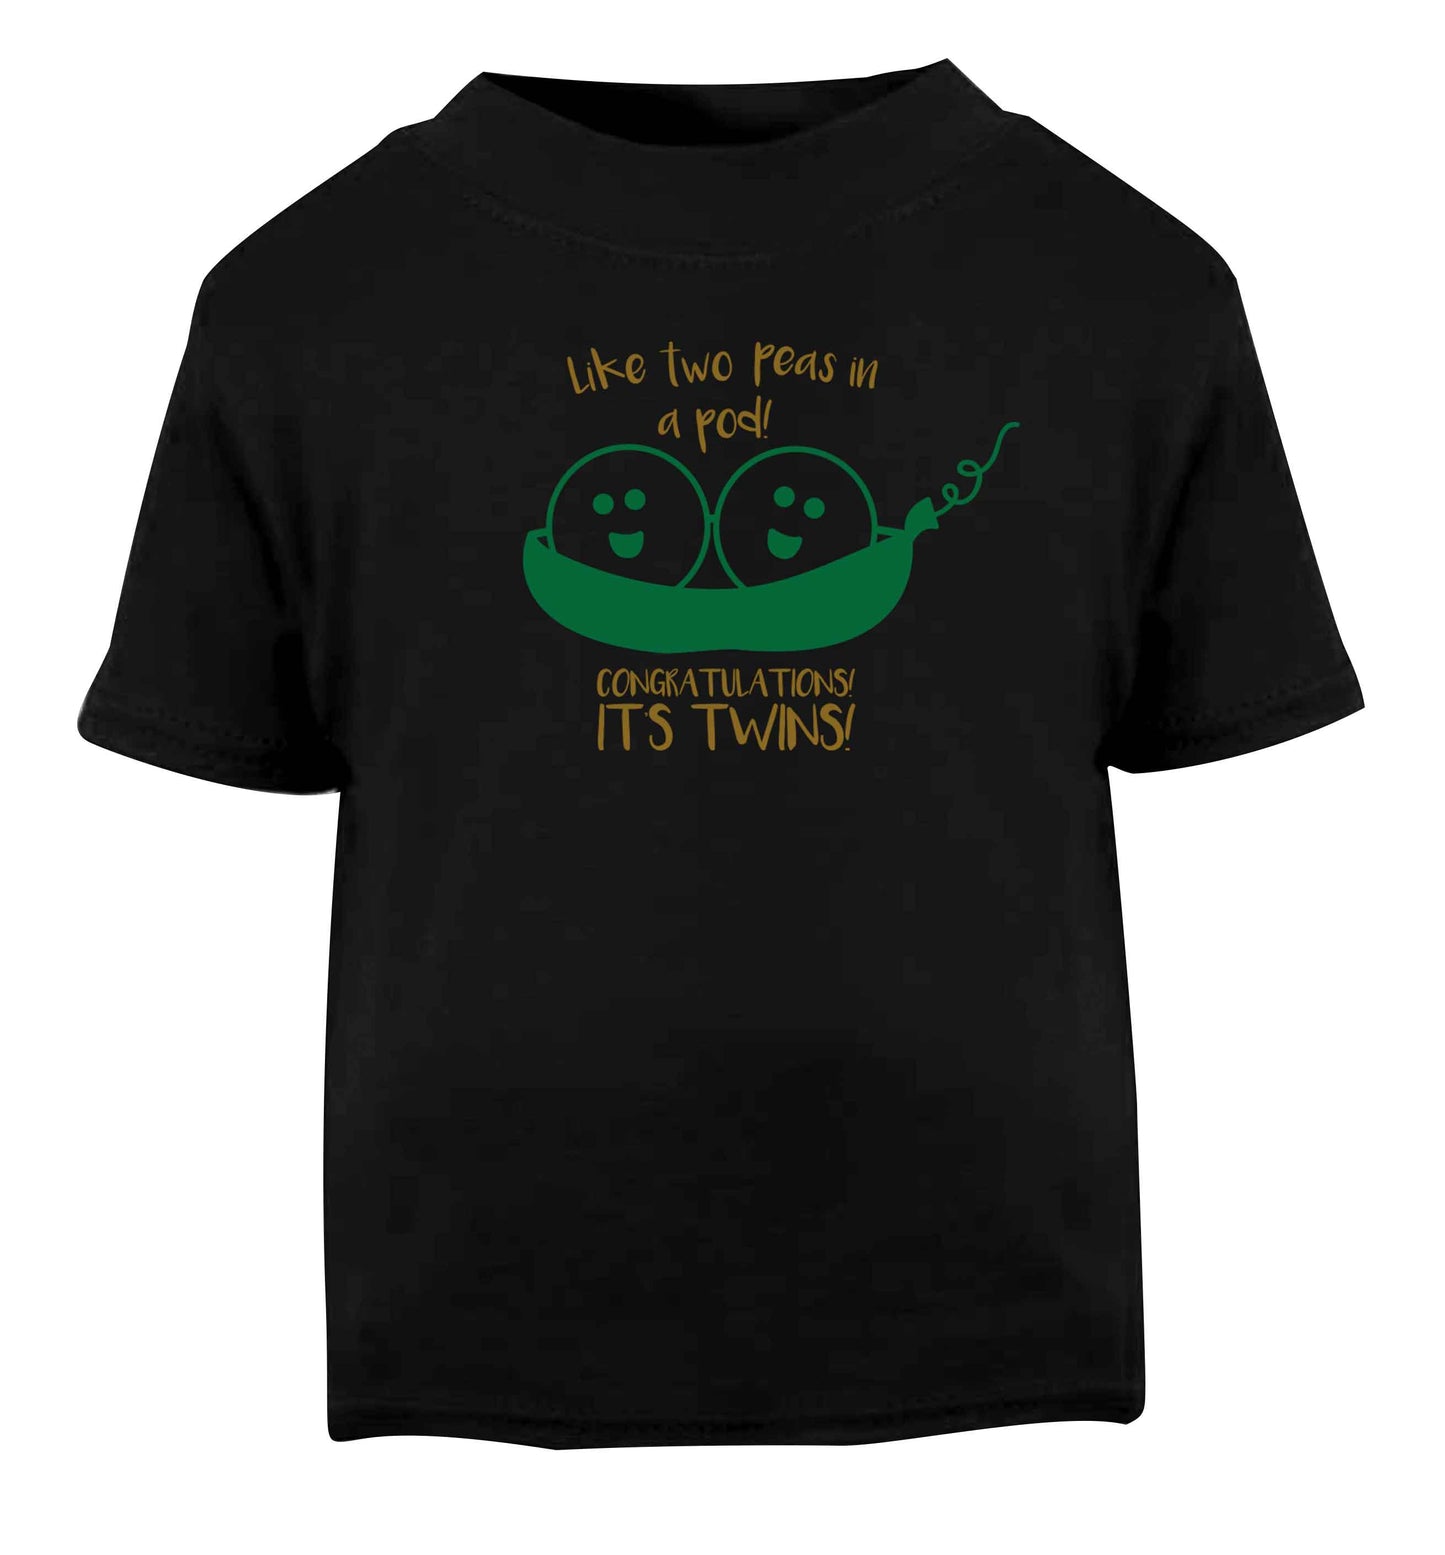 Like two peas in a pod! Congratulations it's twins! Black baby toddler Tshirt 2 years